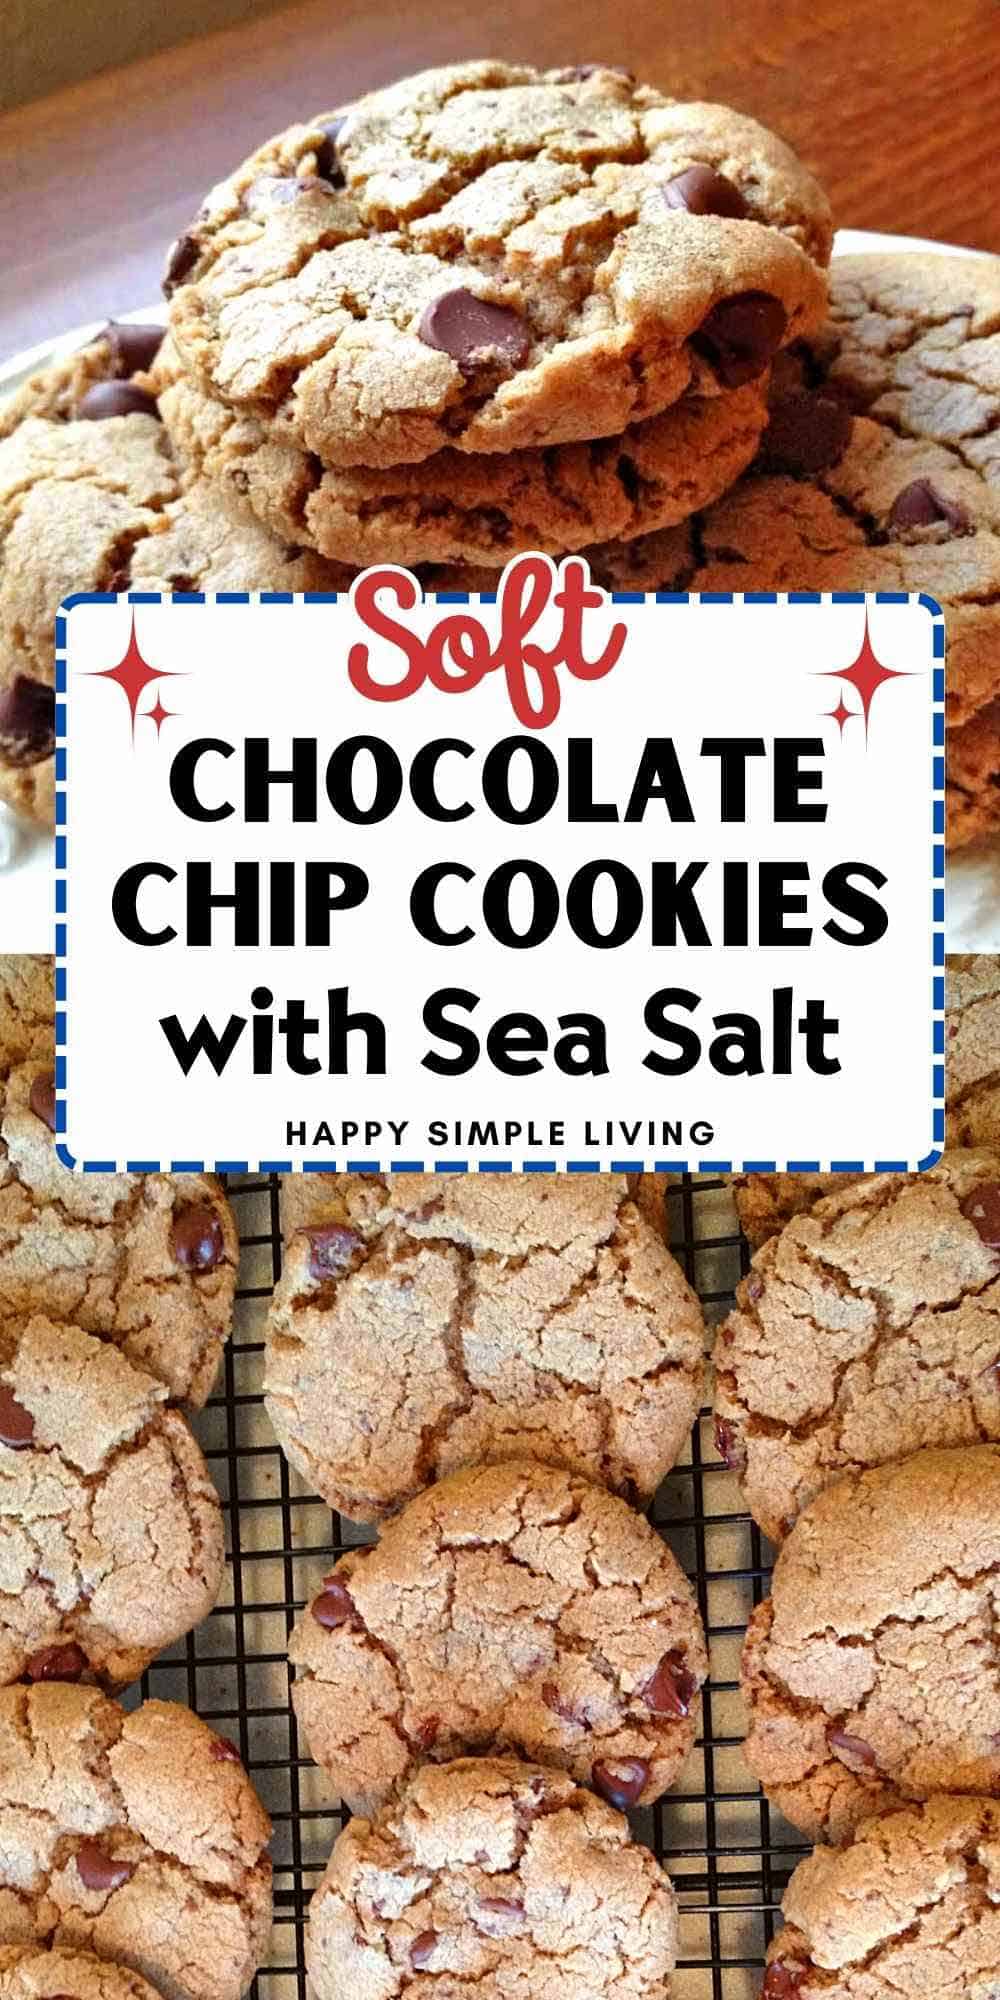 Chocolate chip cookies with sea salt up close and shown on a cooling rack.